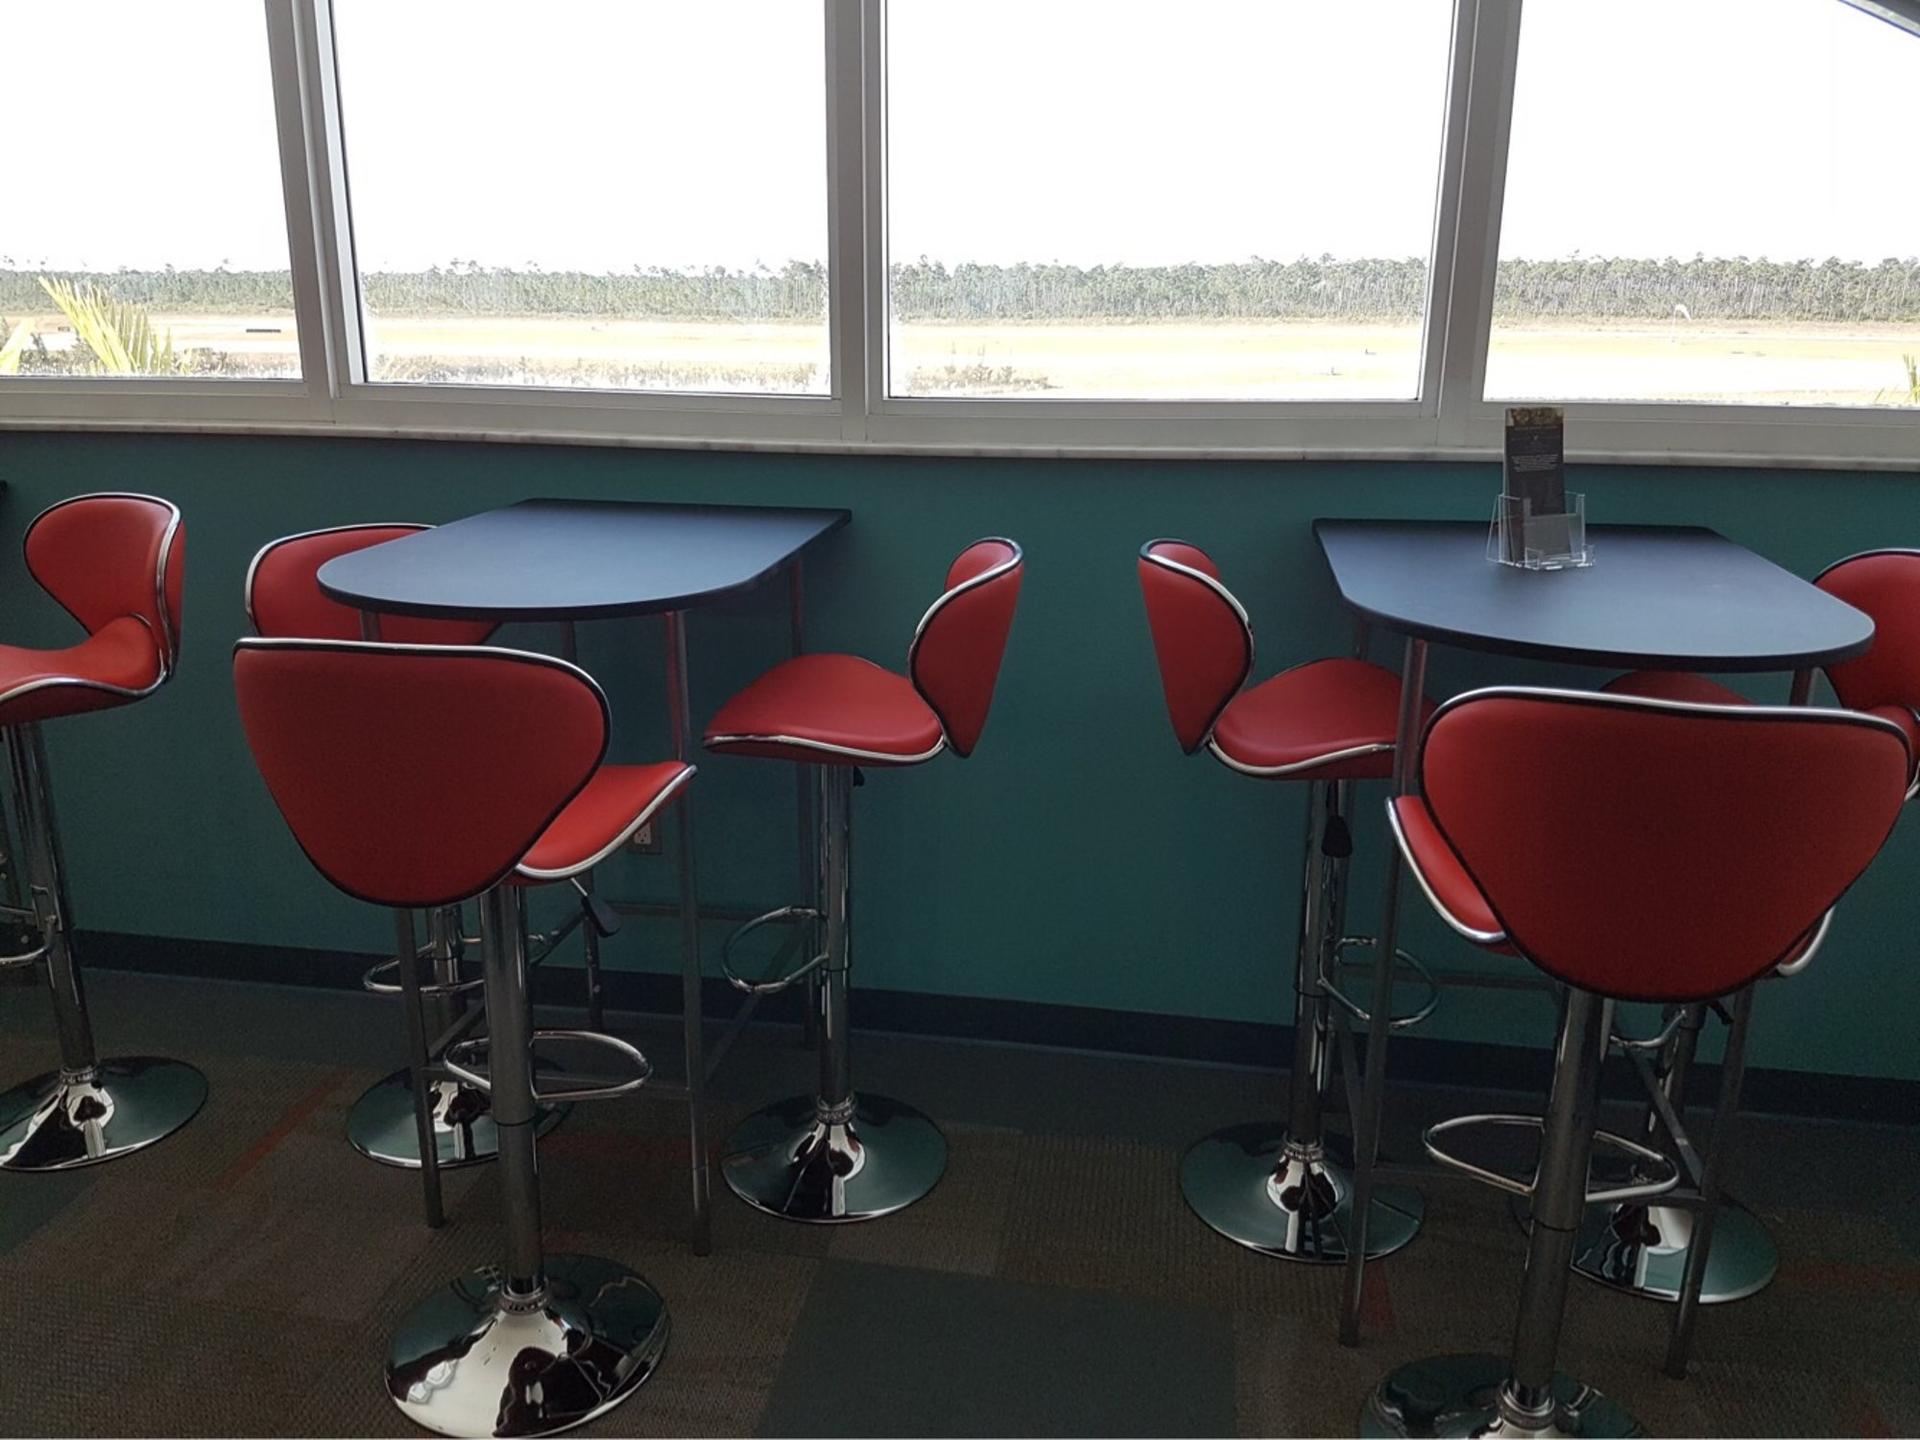 Skyview Airport Lounge image 5 of 6